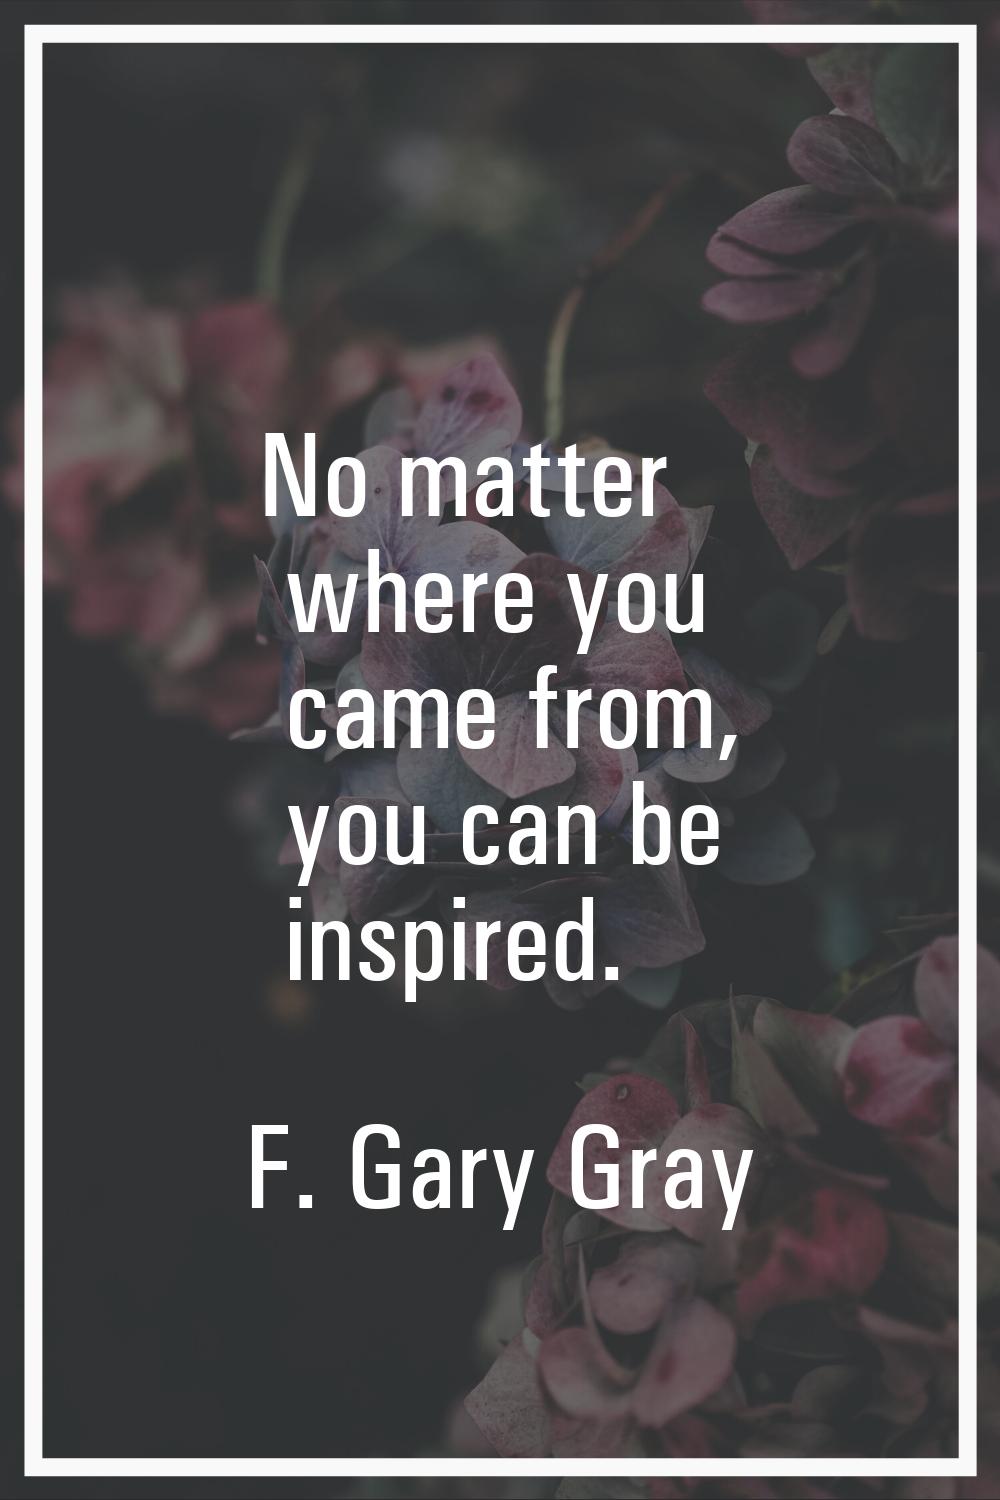 No matter where you came from, you can be inspired.